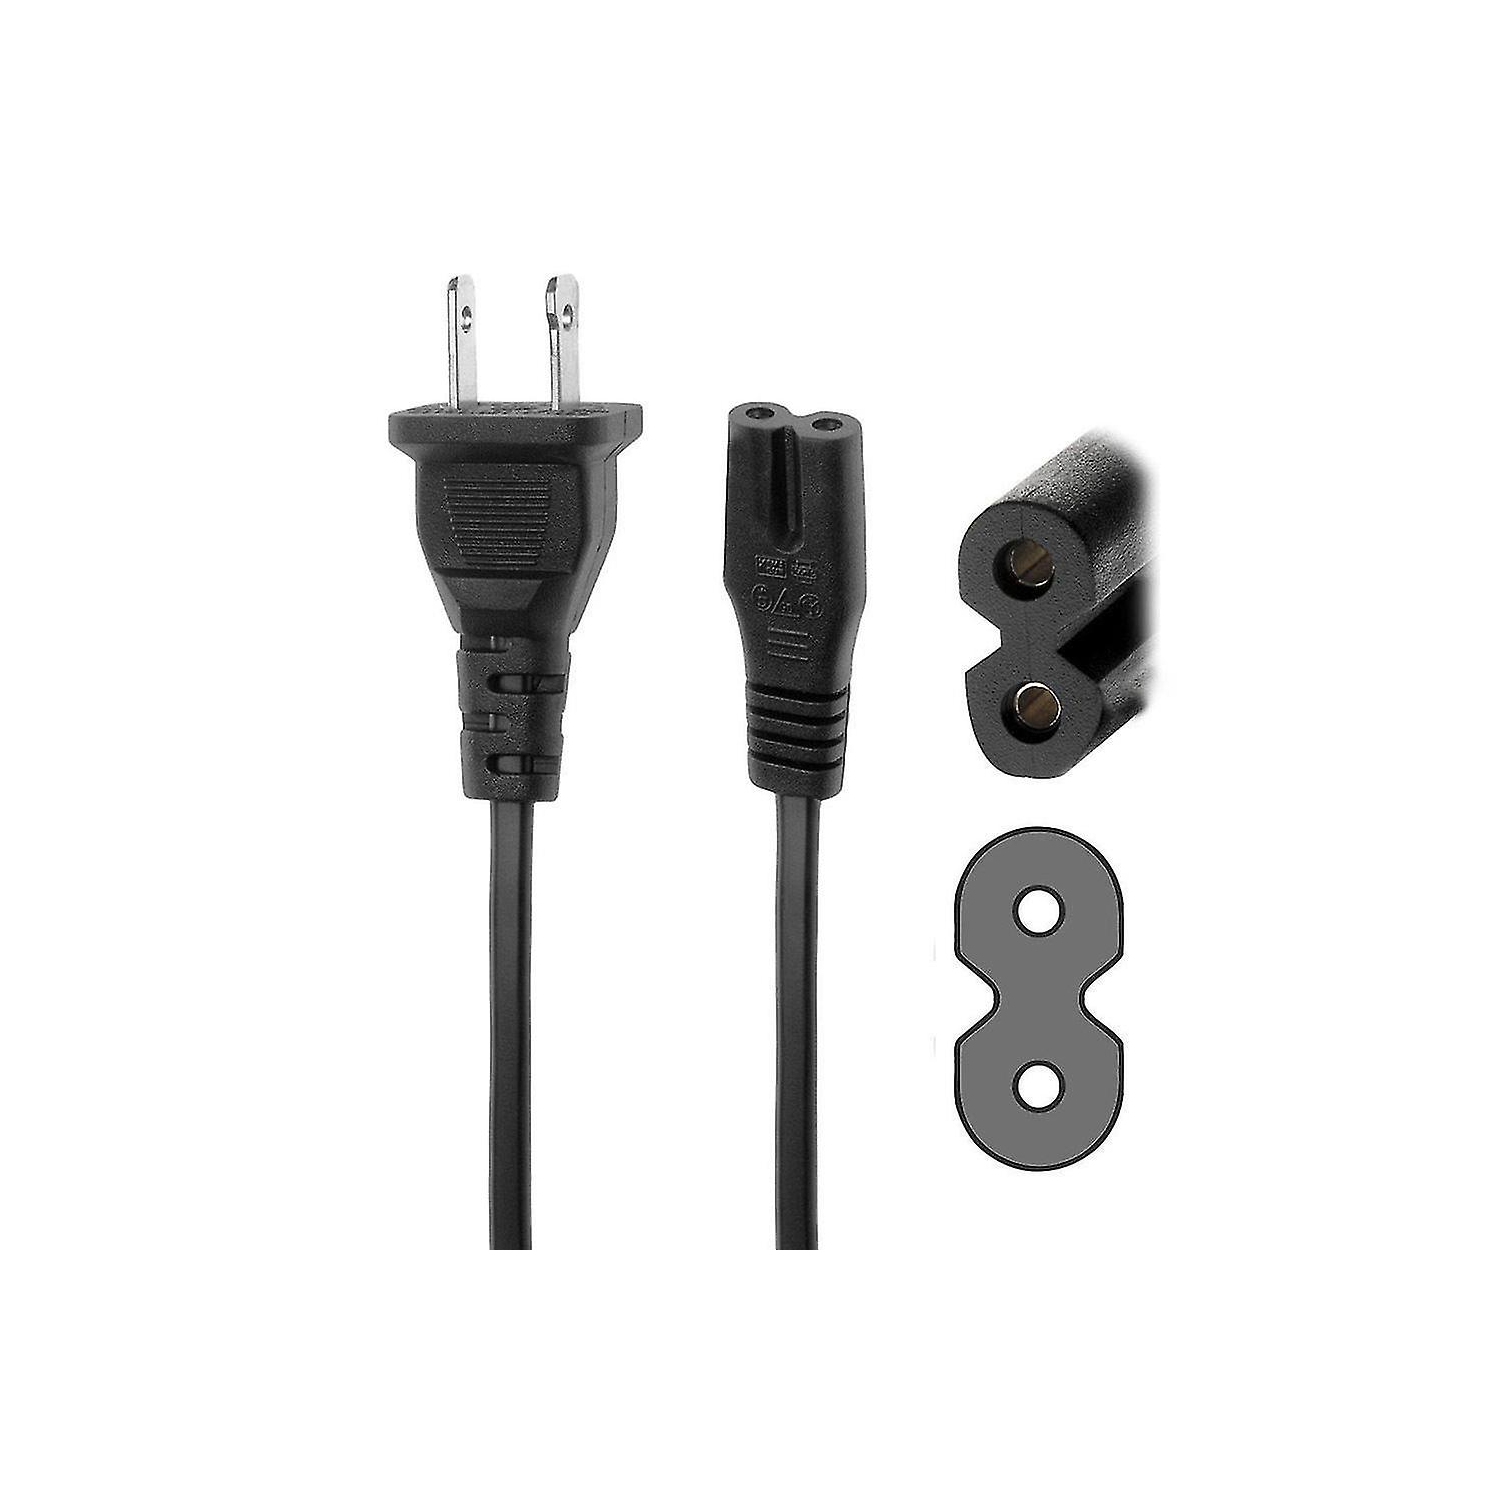 Farfi 5ft Us Plug 2-prong Figure 8 Ac Power Cord Adapter Cable For Sony Ps2 Ps3 Laptop